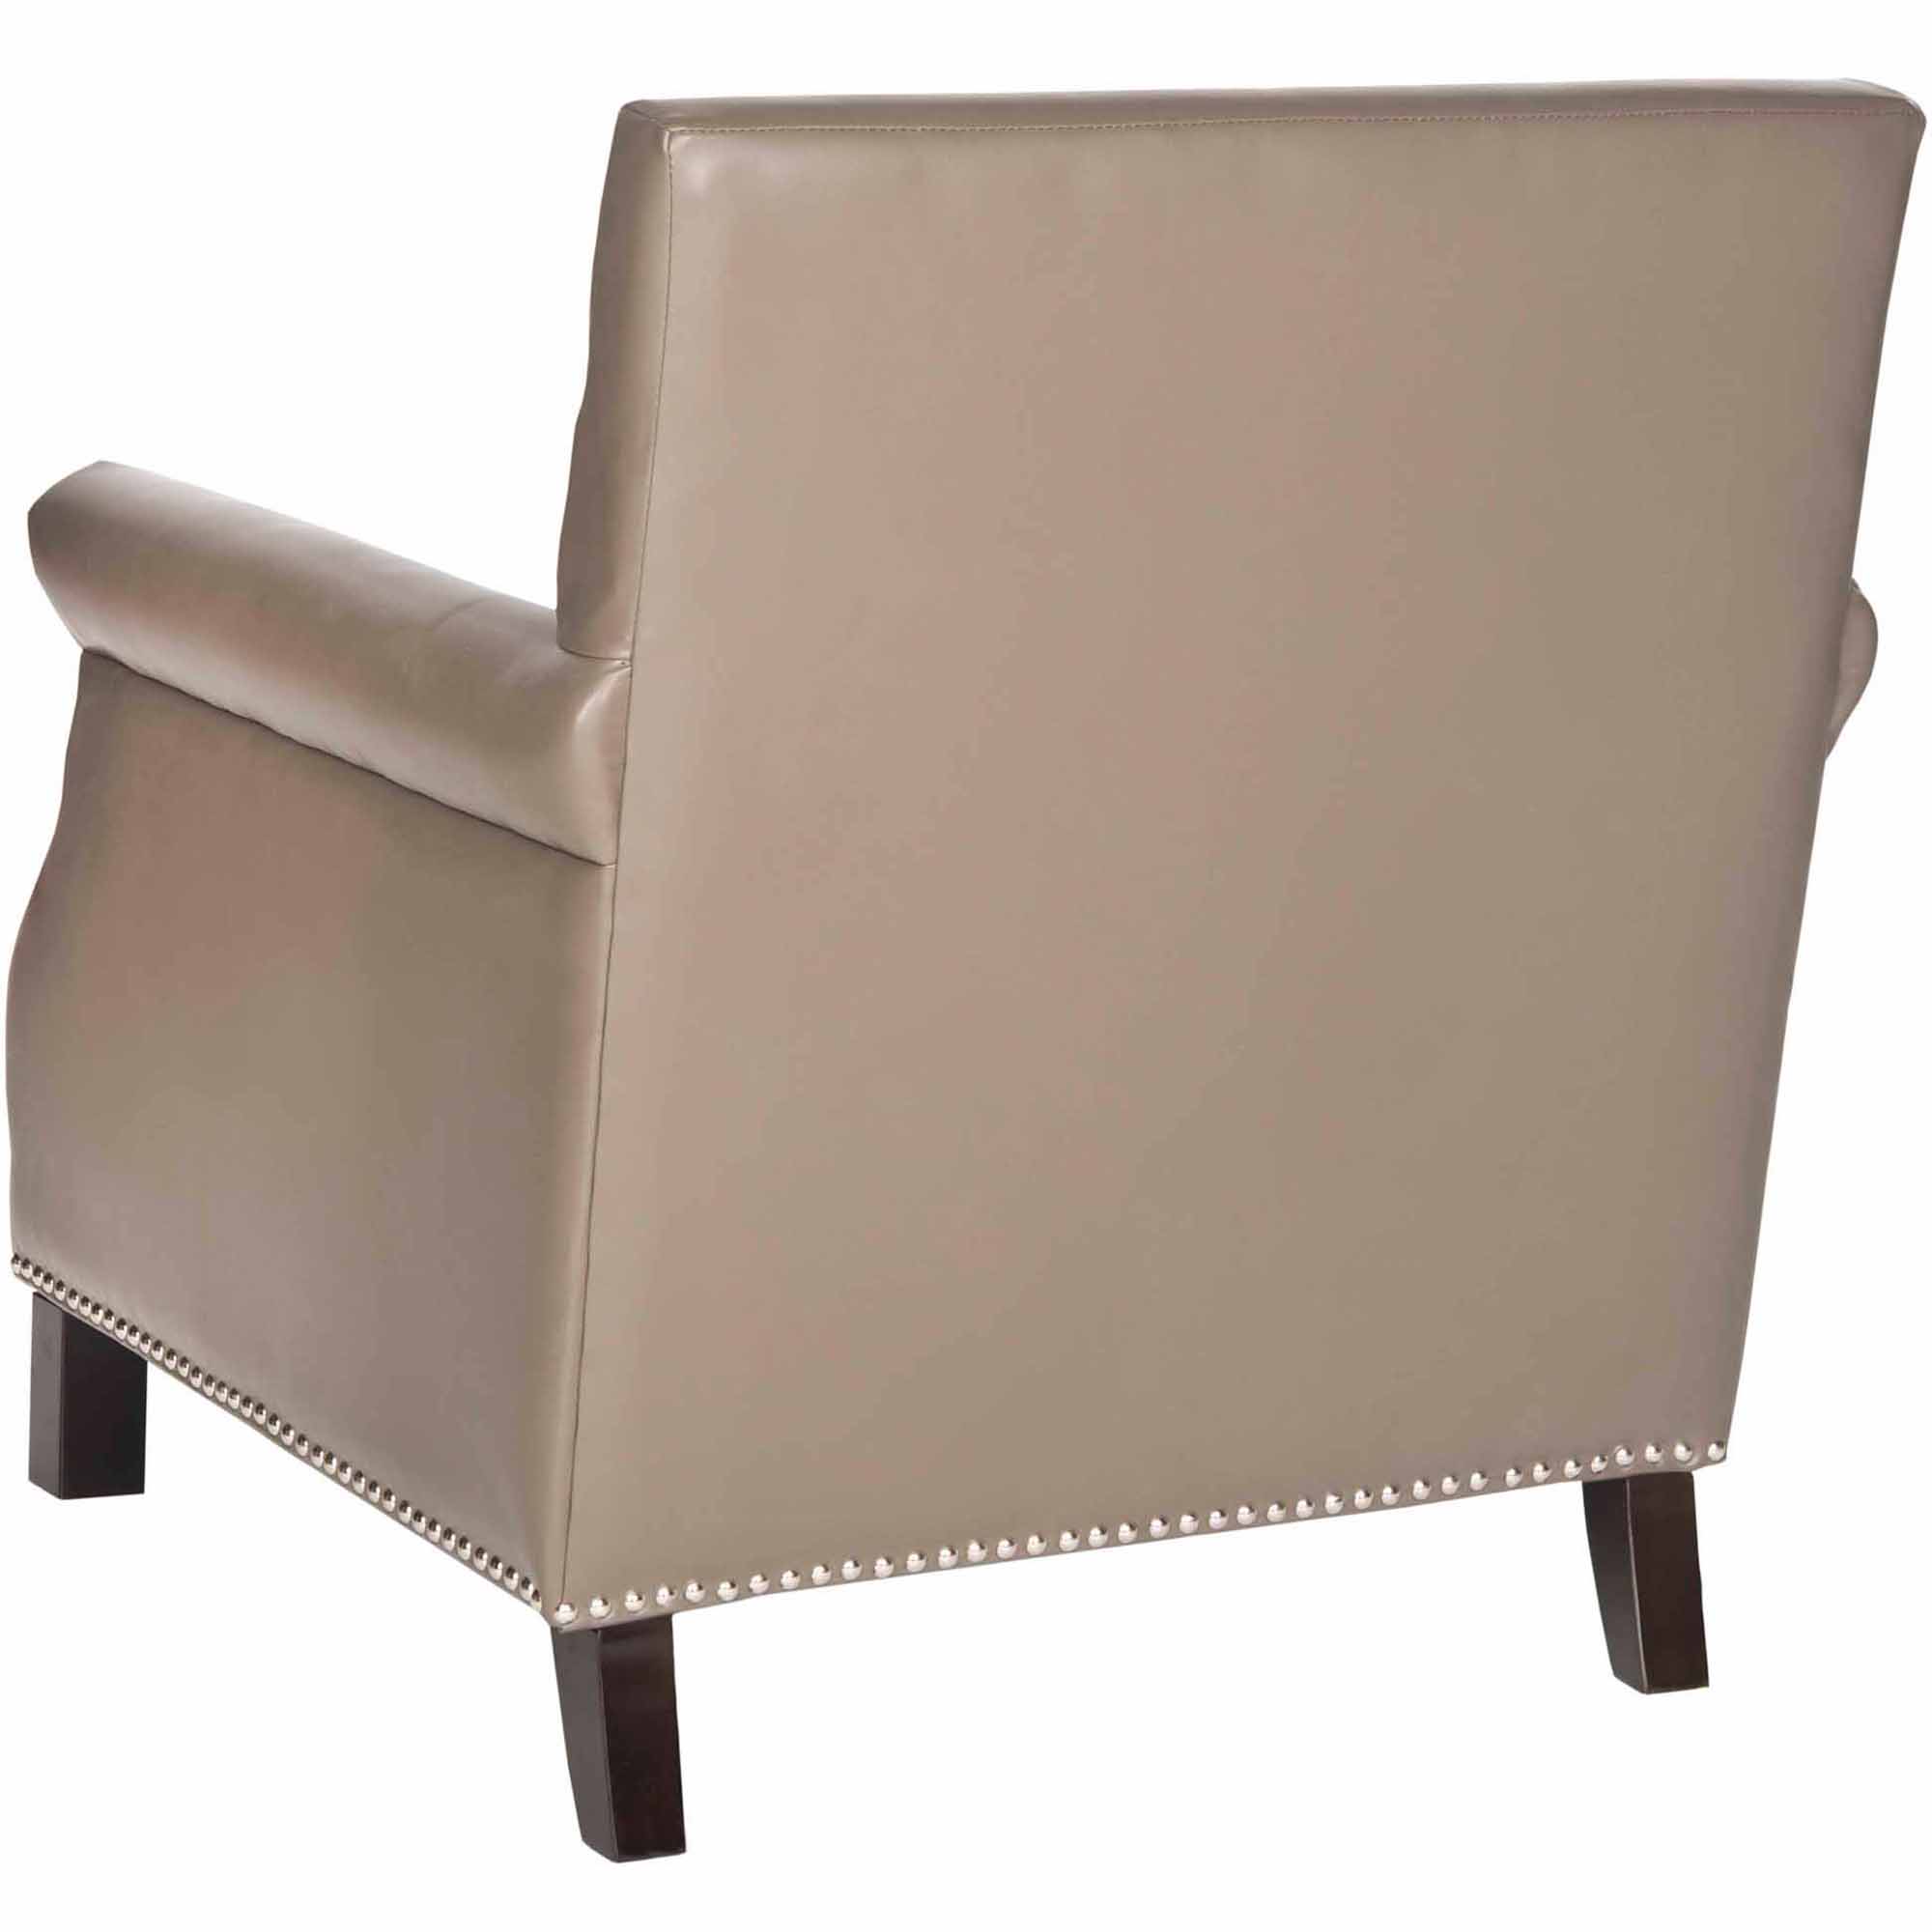 SAFAVIEH Easton Rustic Glam Upholstered Club Chair w/ Nailheads, Clay - image 4 of 4